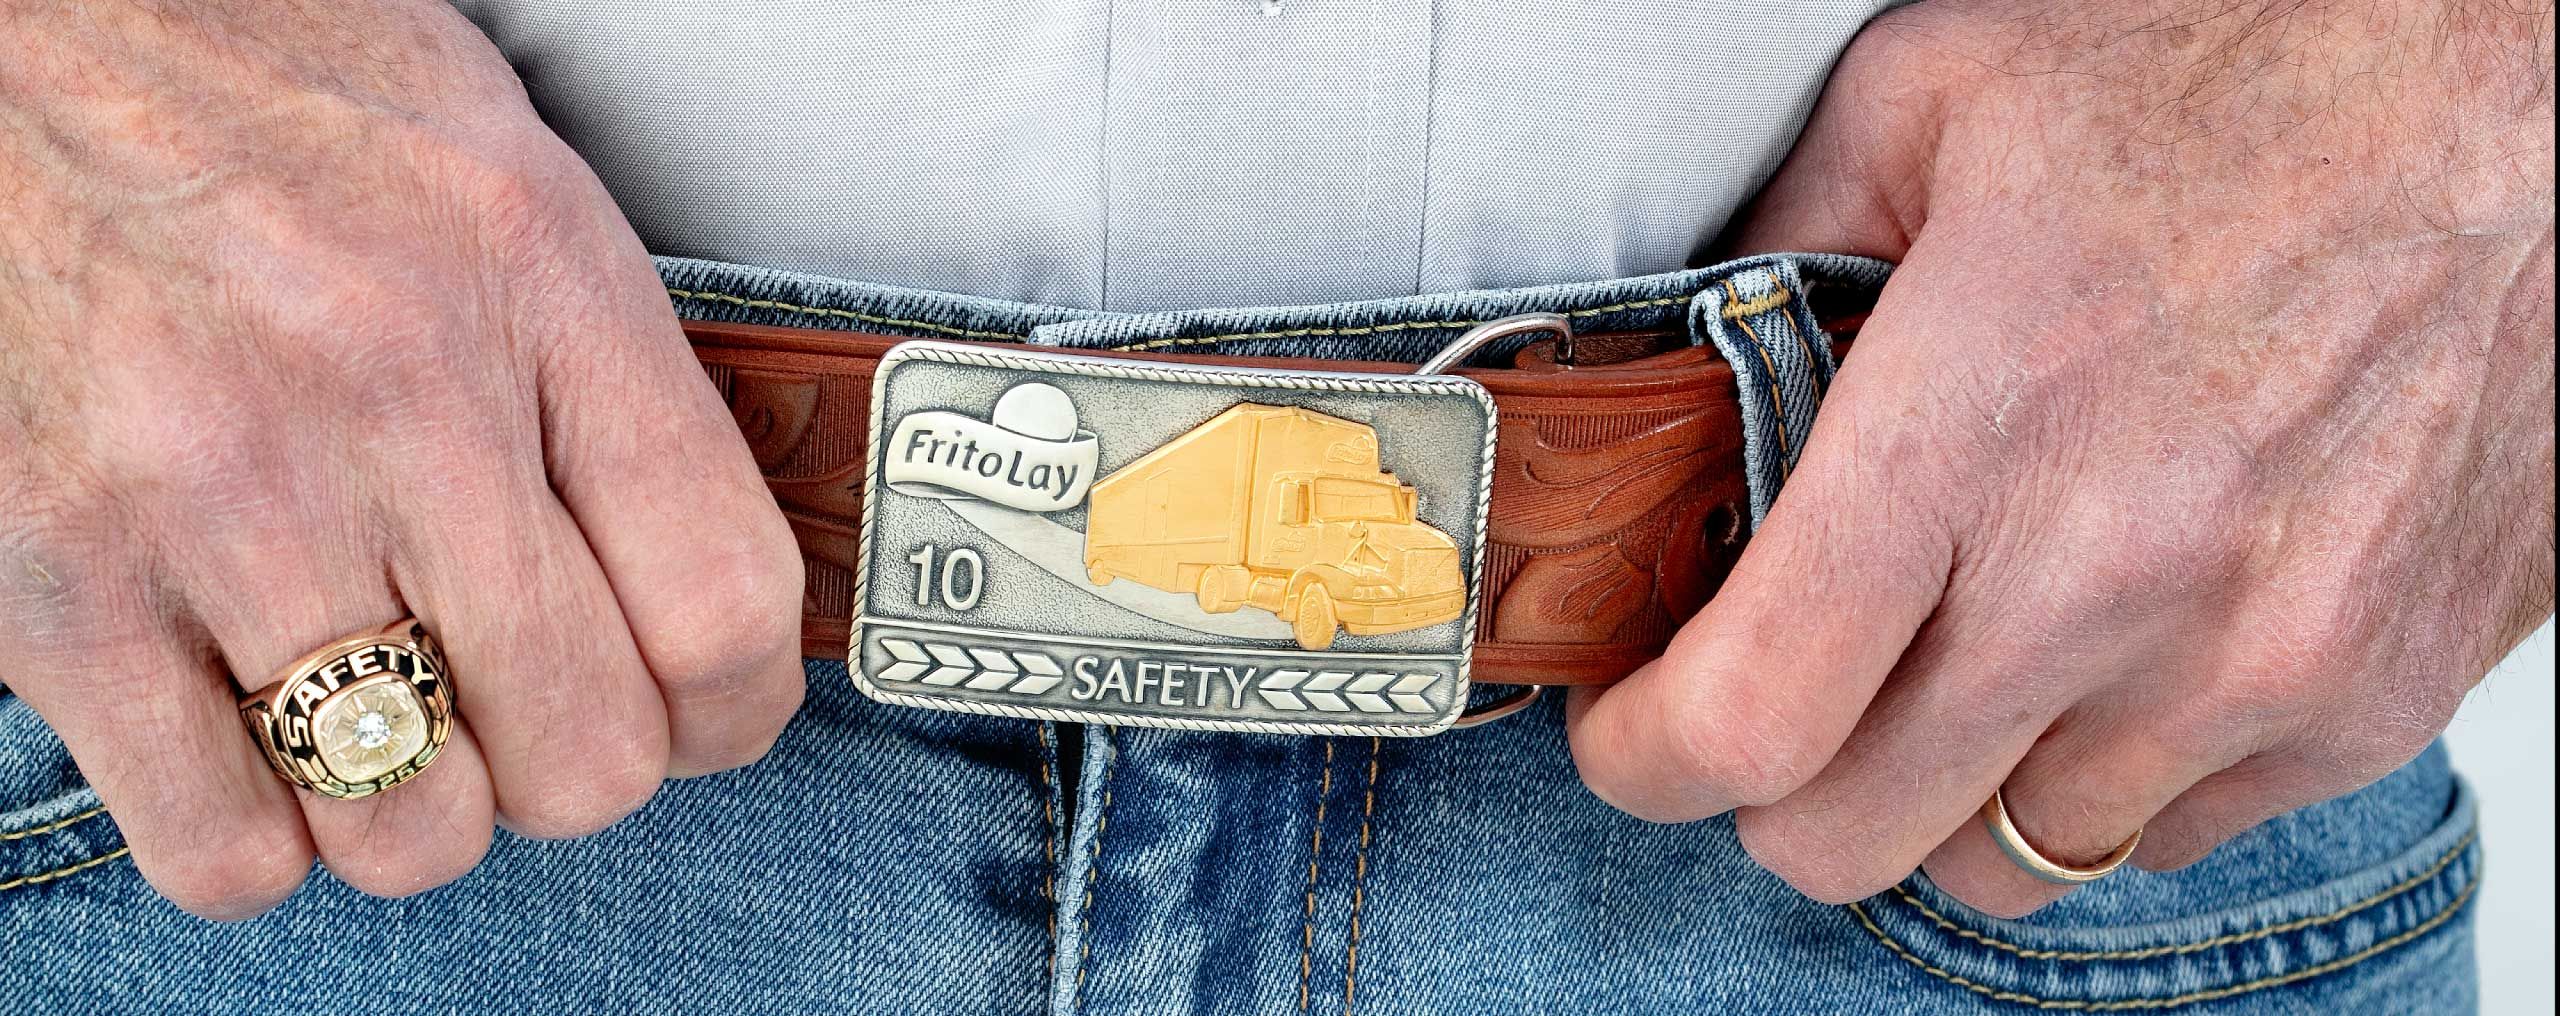 Custom Belt Buckle for Frito Lay Employee Recognition and Reward Program